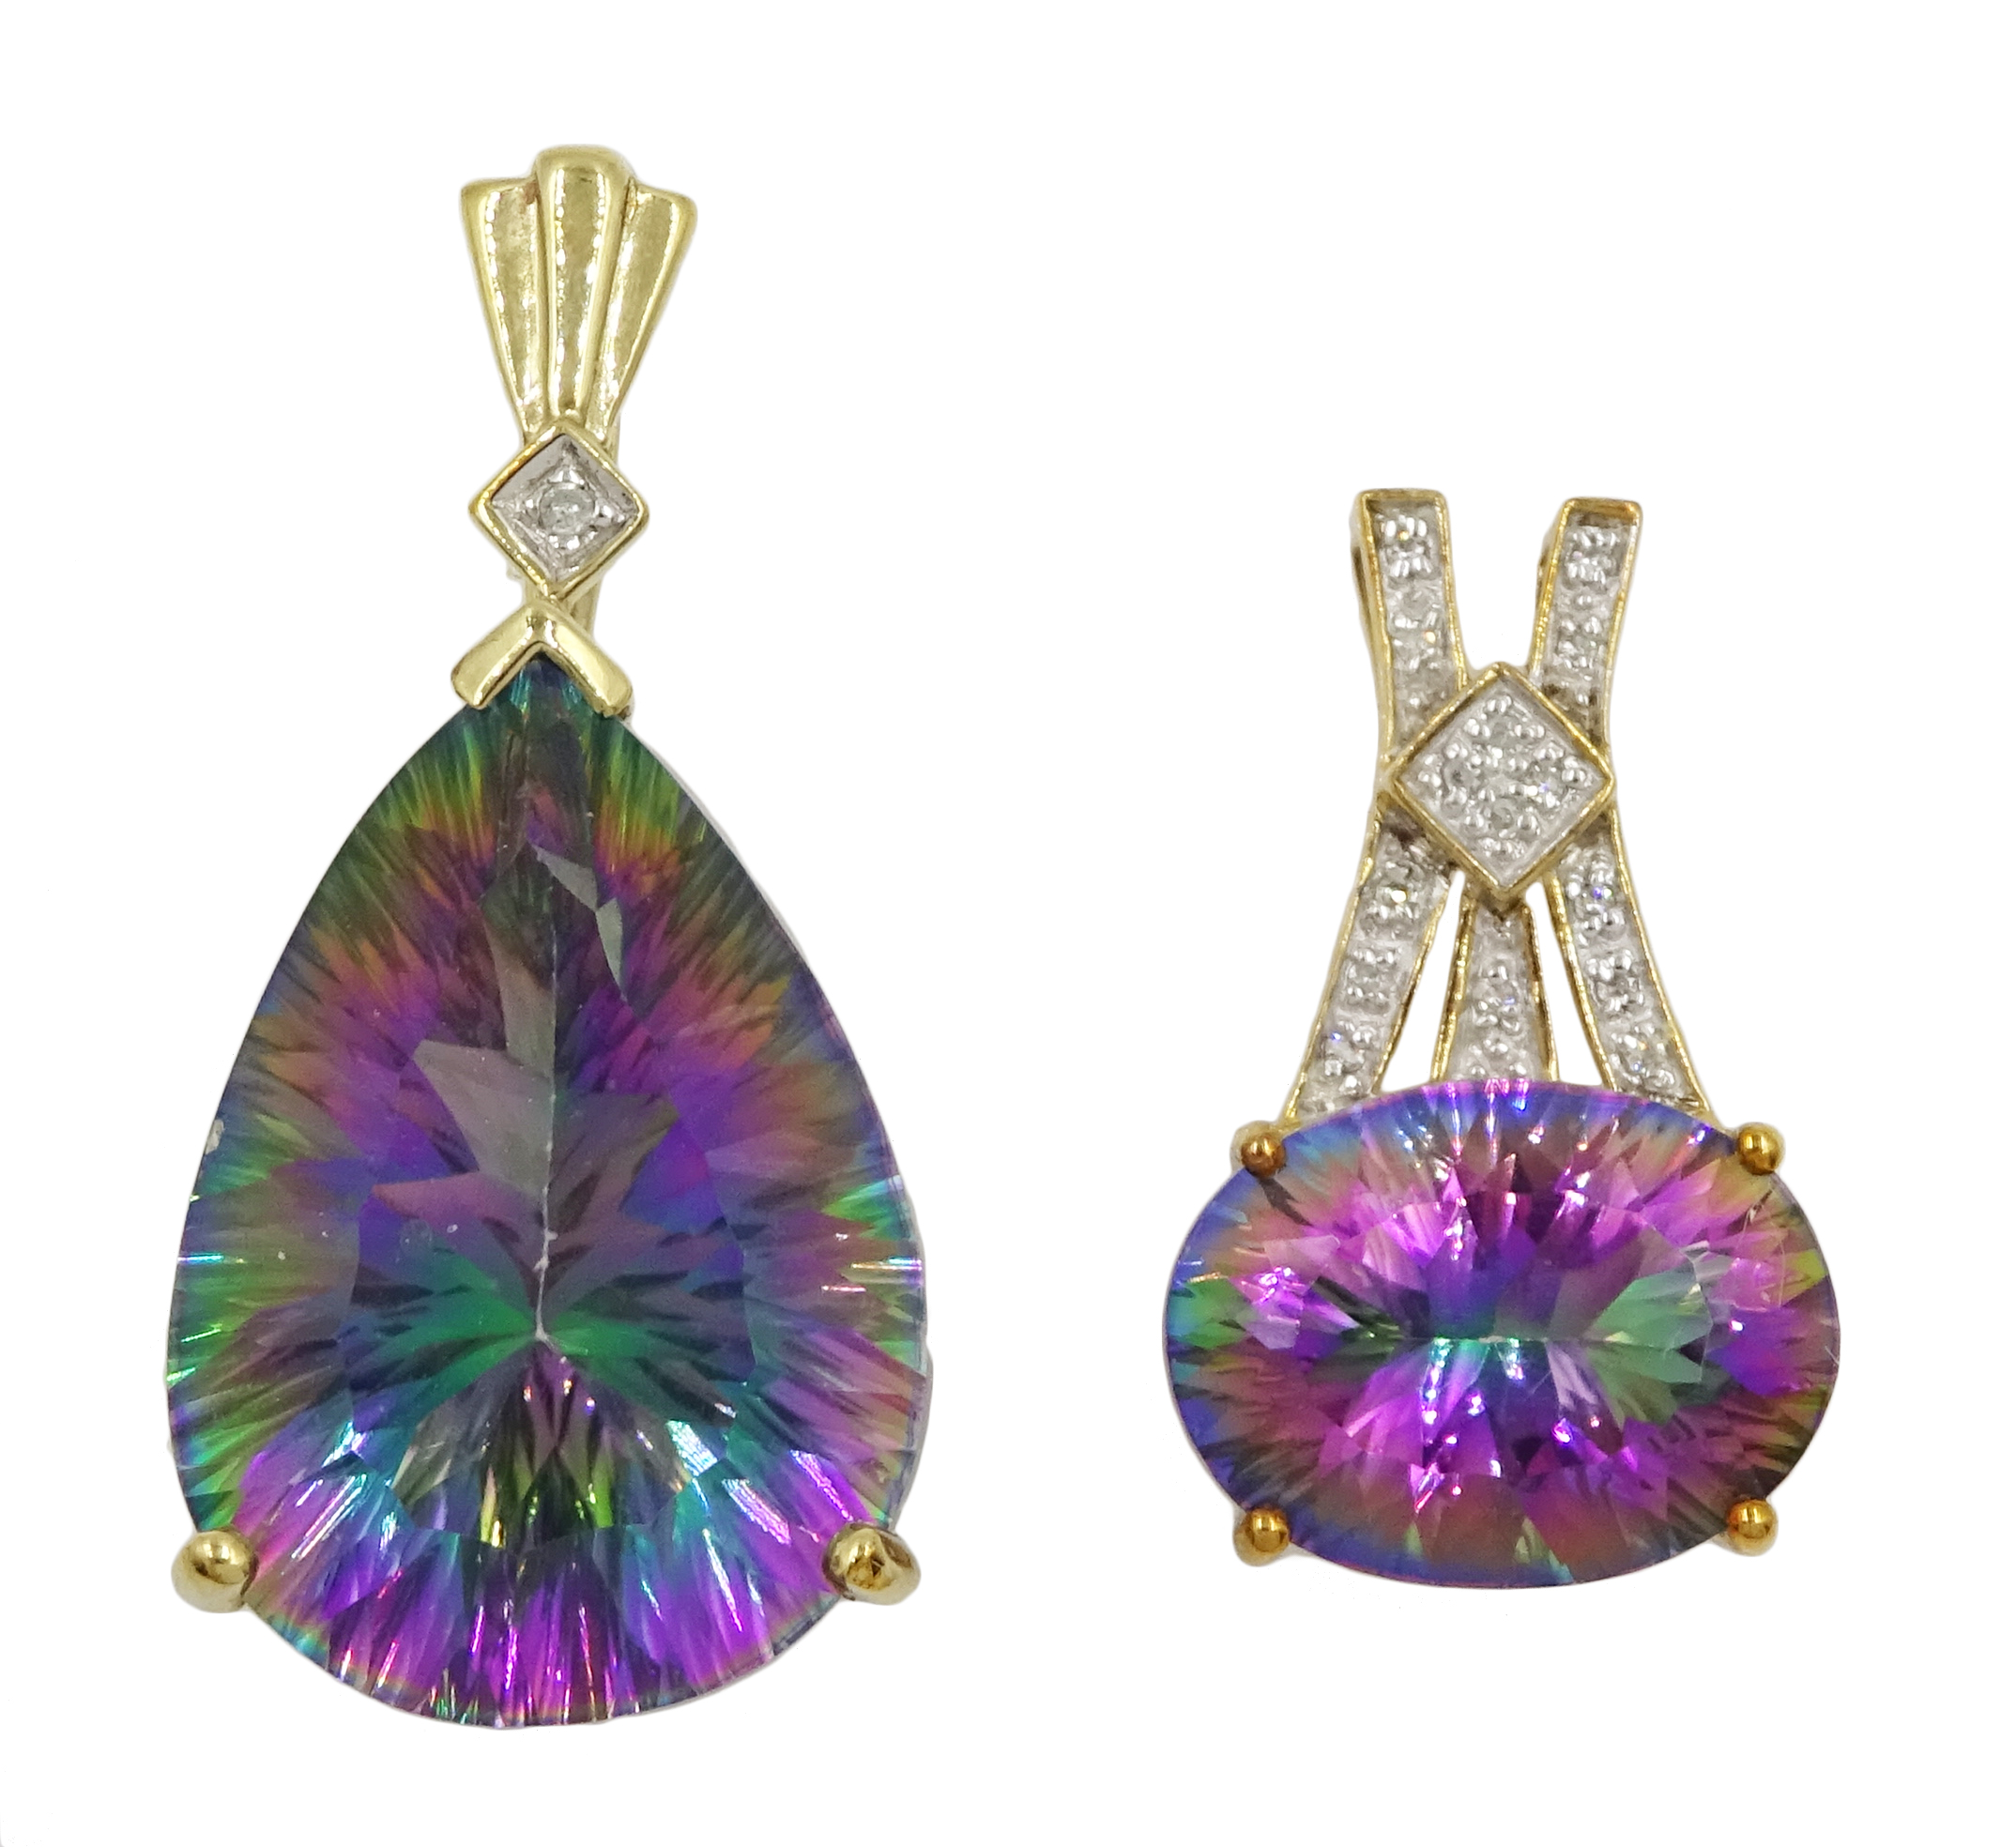 Two 9ct gold oval and pear shaped mystic topaz and diamond pendants, both hallmarked